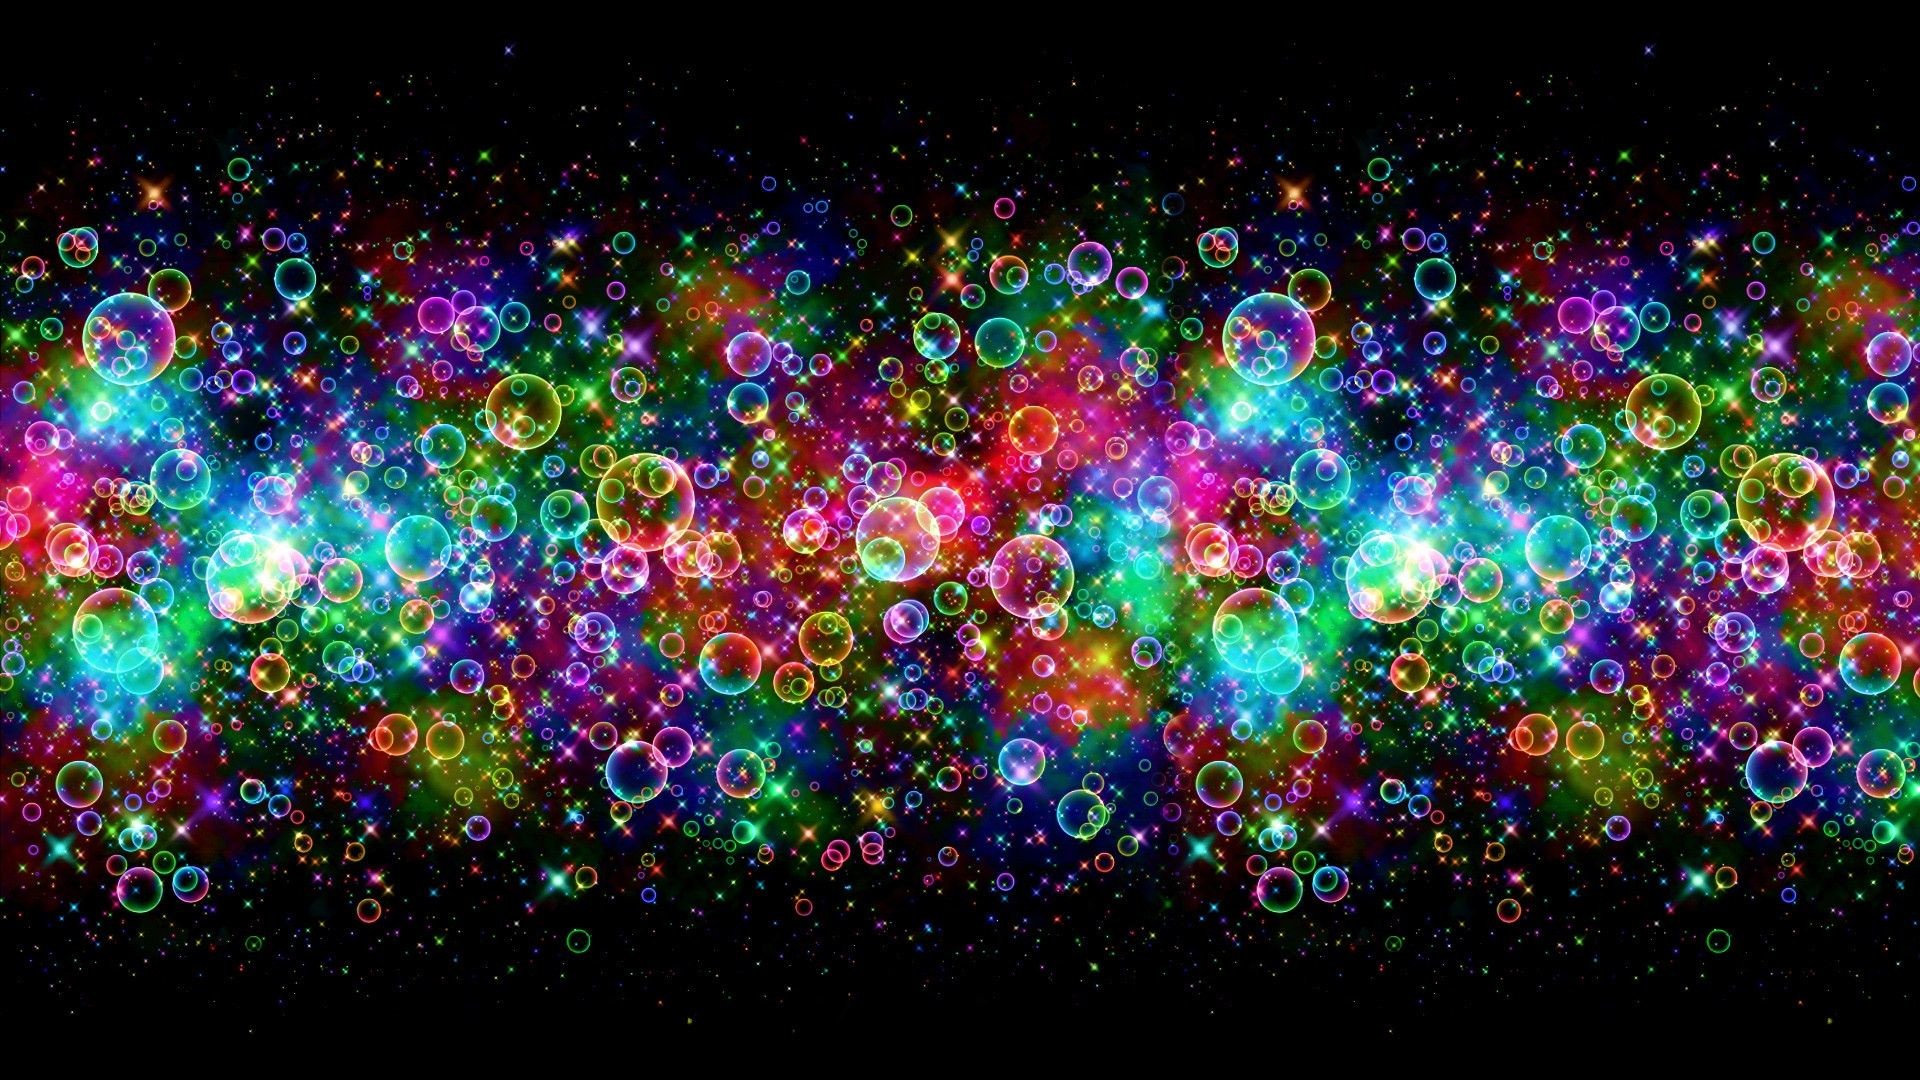 1920x1080 Cool Sparkly Backgrounds - Wallpaper Cave